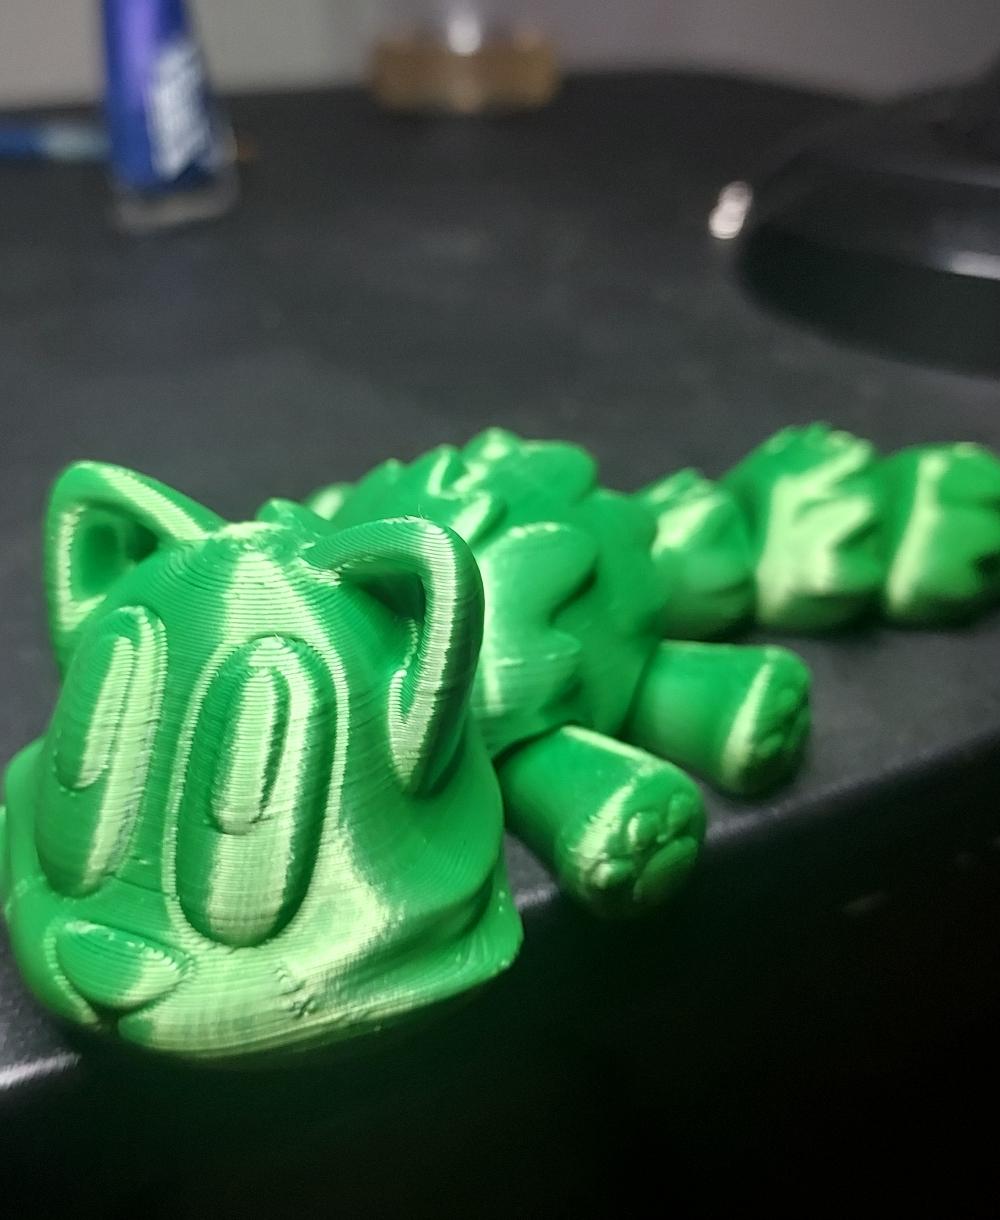 undefined - First print in over a year, and didn't even have to level the bed to get this result. 😎 - 3d model